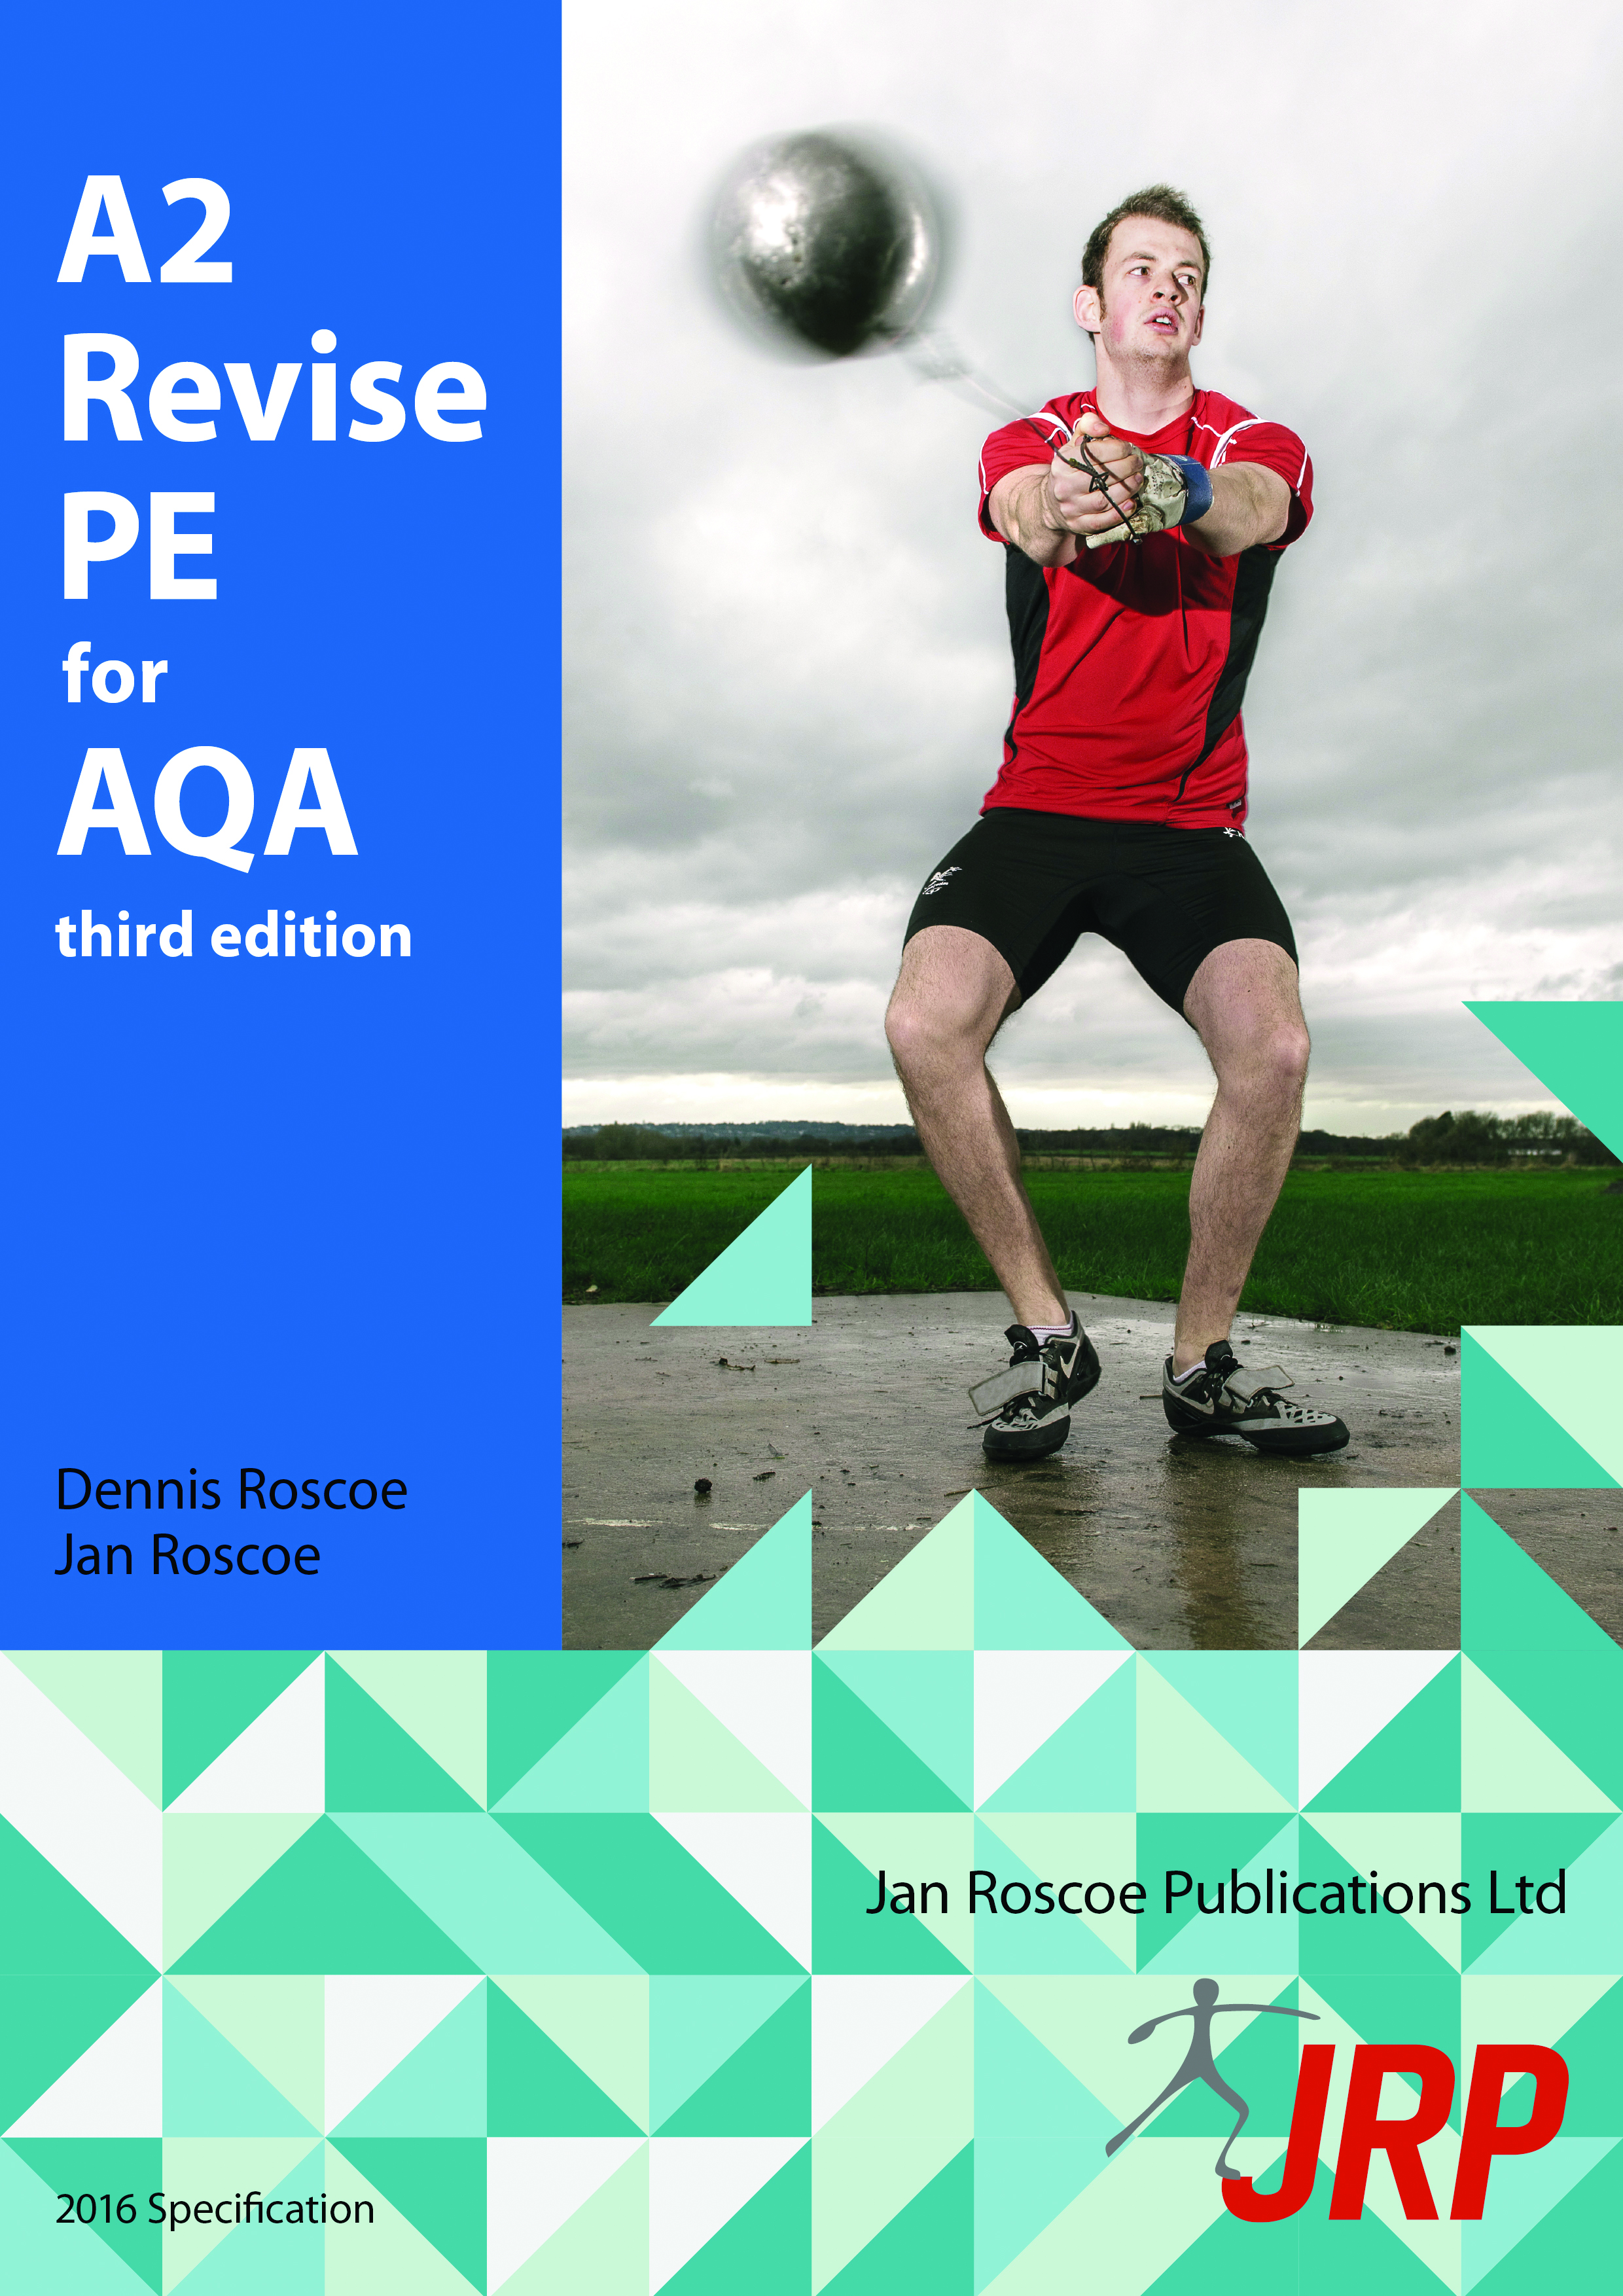 A2 Revise PE for AQA 3rd Edition